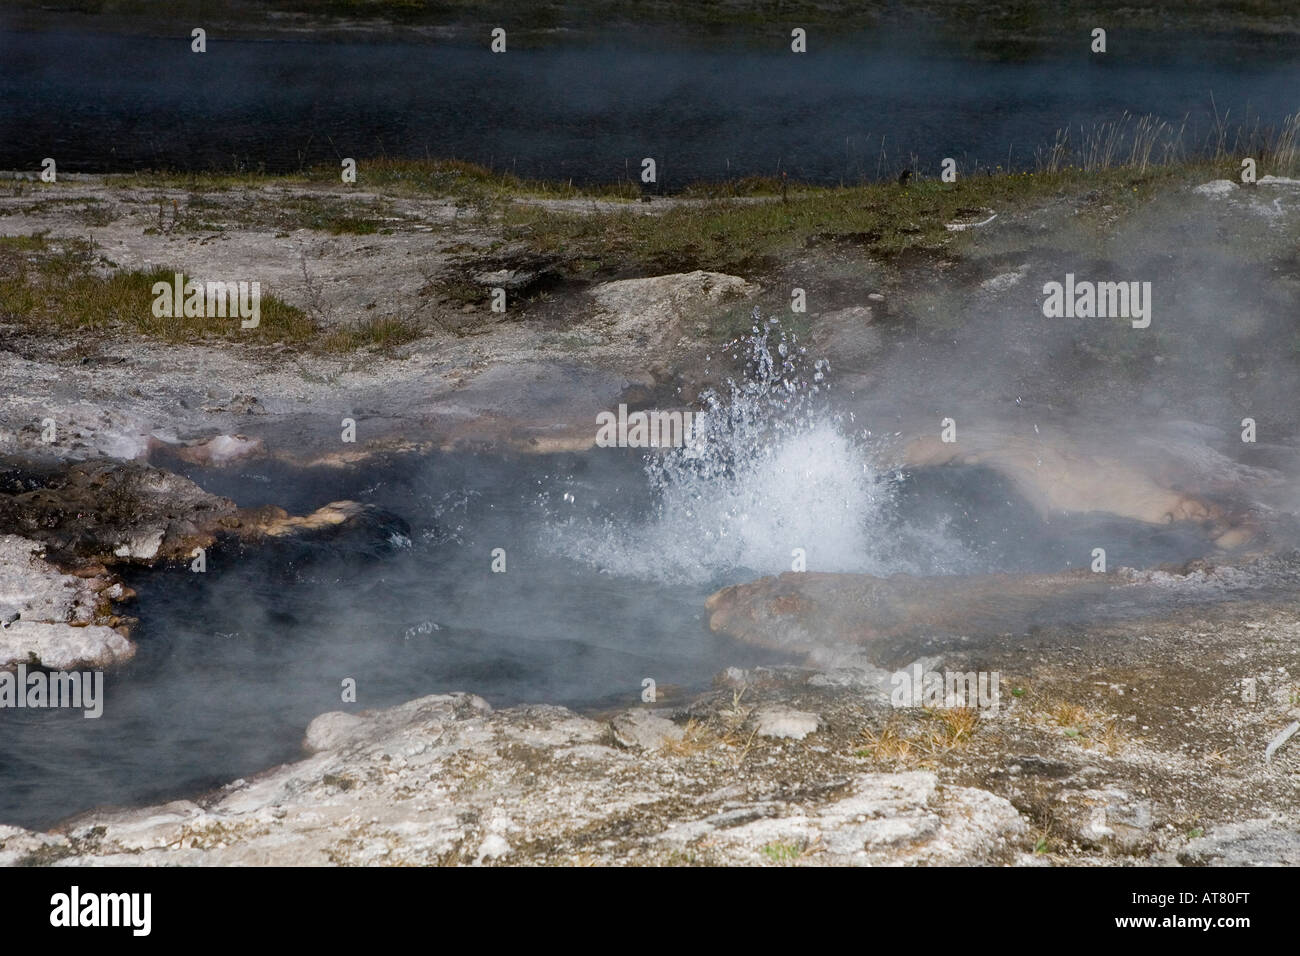 A pool of boiling water Yellowstone National Park Wyoming Stock Photo